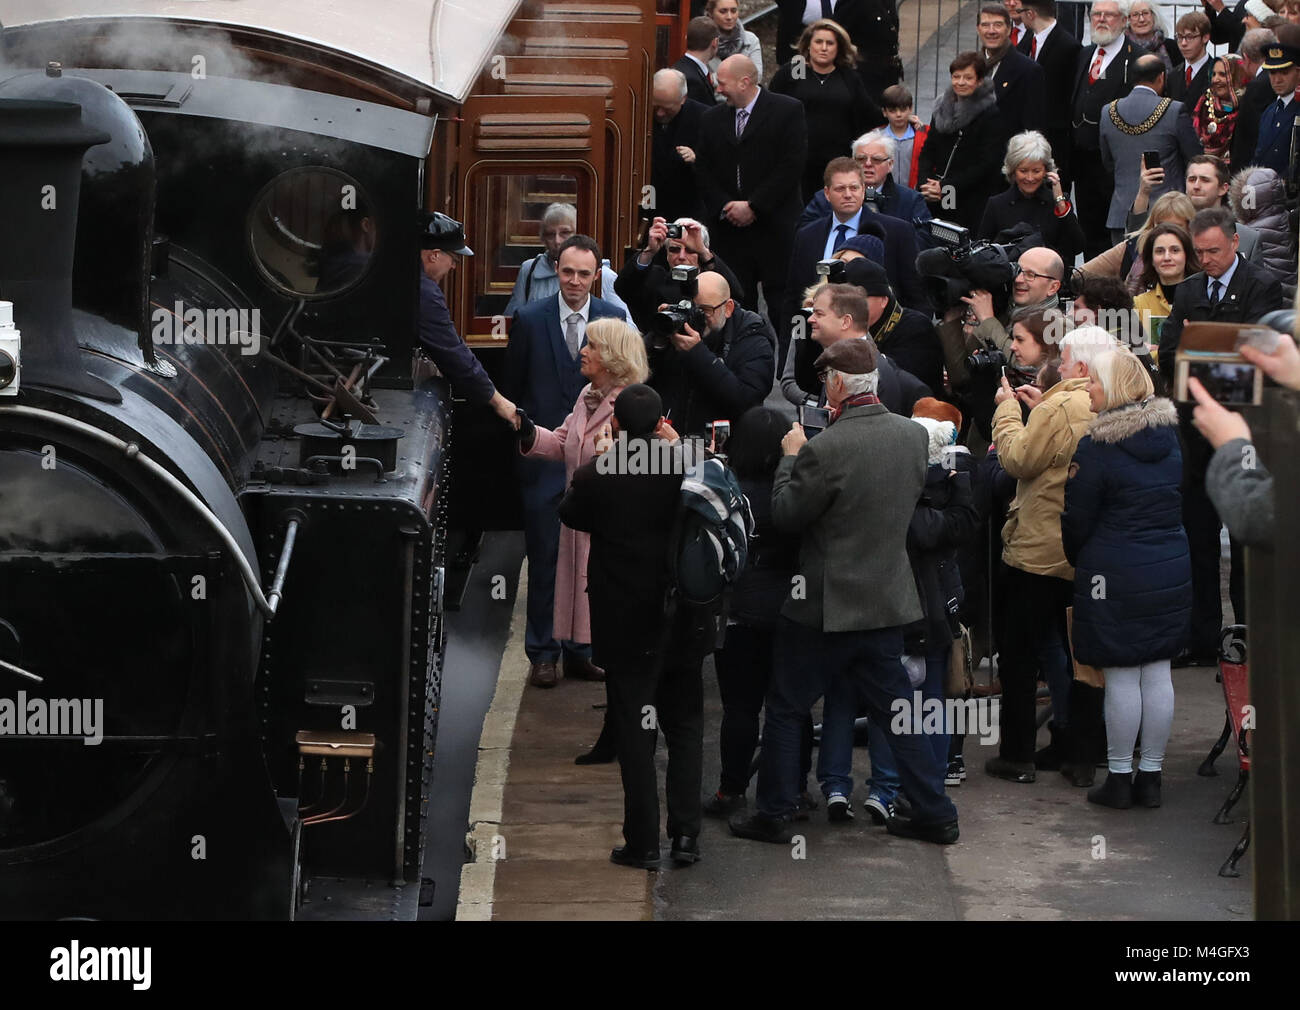 The Duchess of Cornwall speaks to the driver as she boards a steam train at The Railway Station in Haworth. Stock Photo